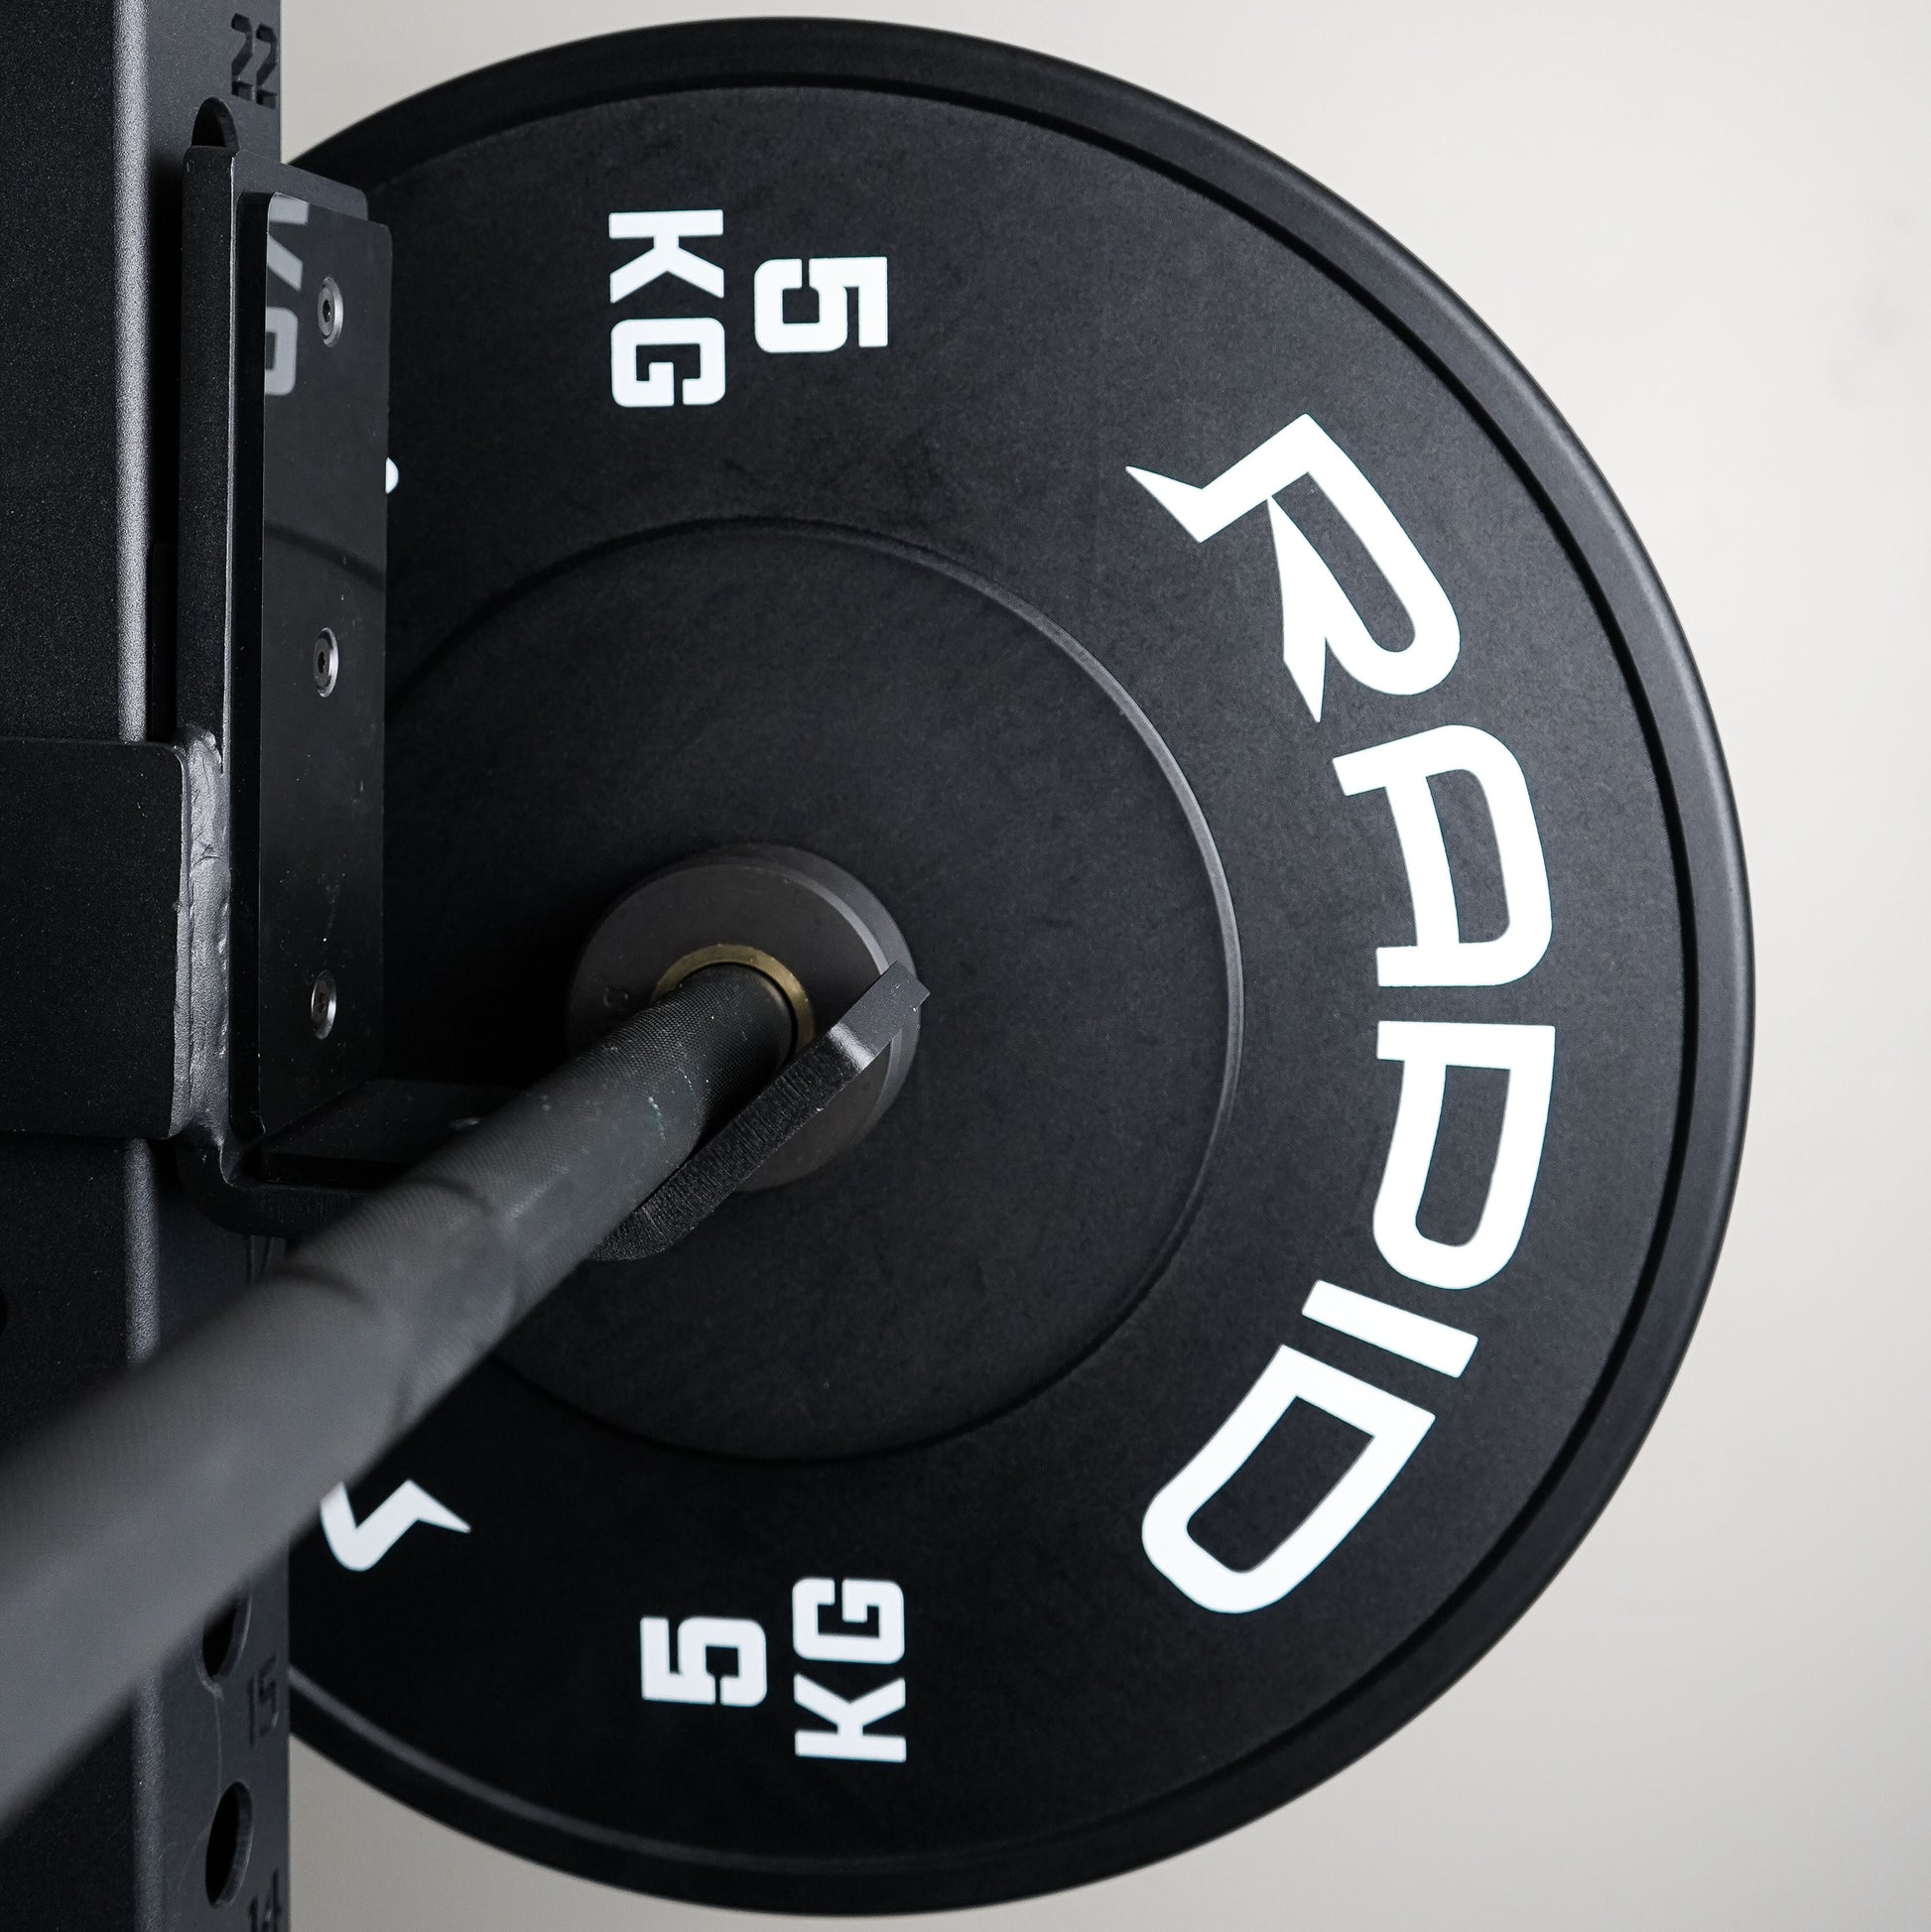 Rapid Motion Rubber Coated Bumper Plates-Gym Direct